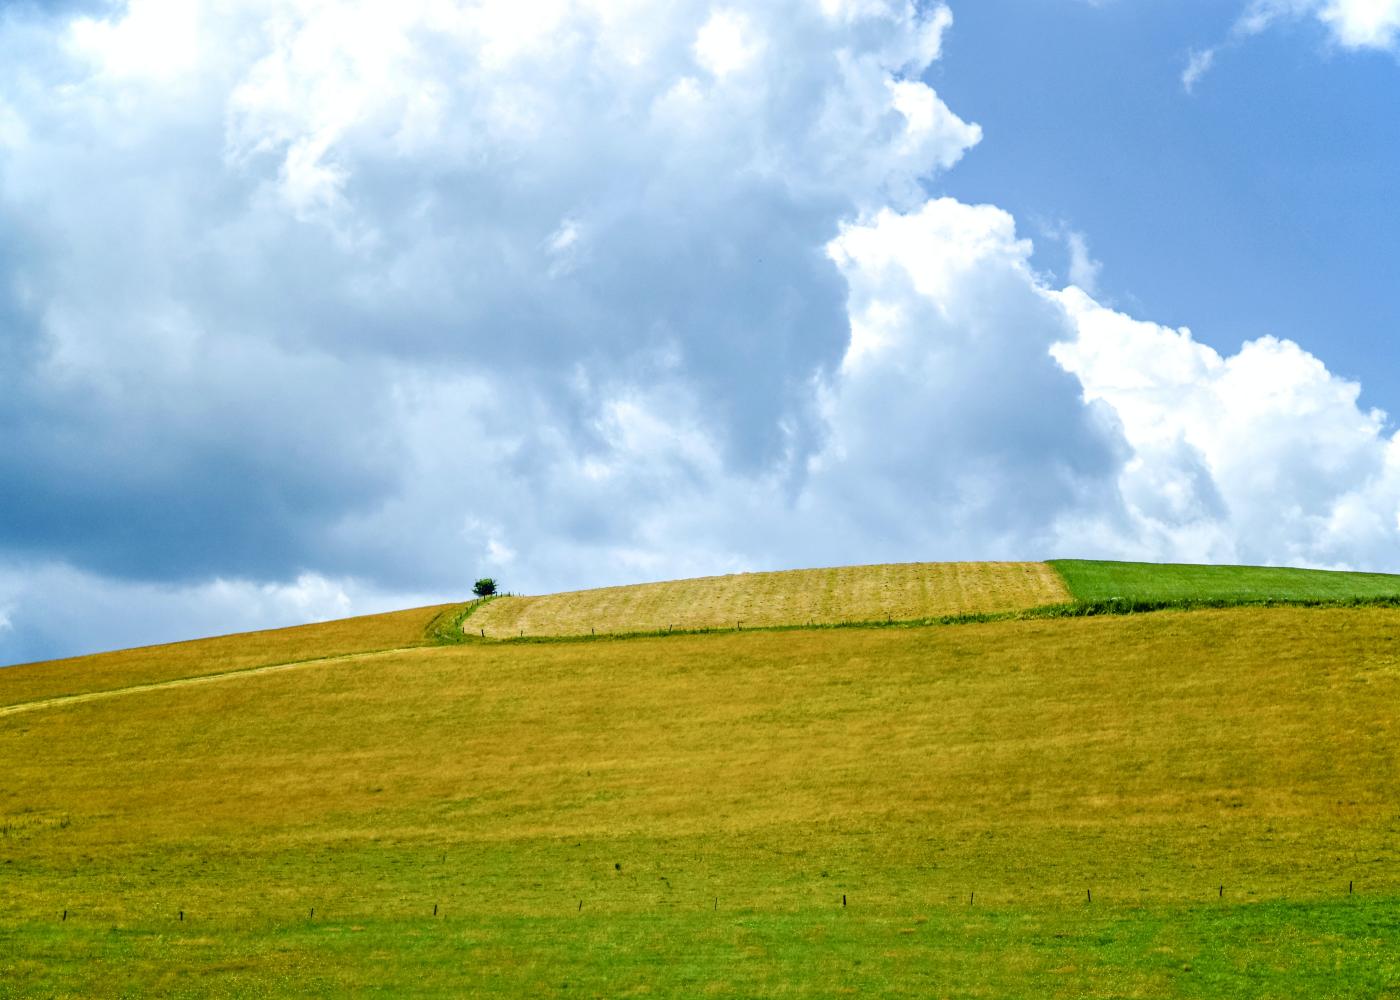 Green grass and empty farmland with cloud skies above.